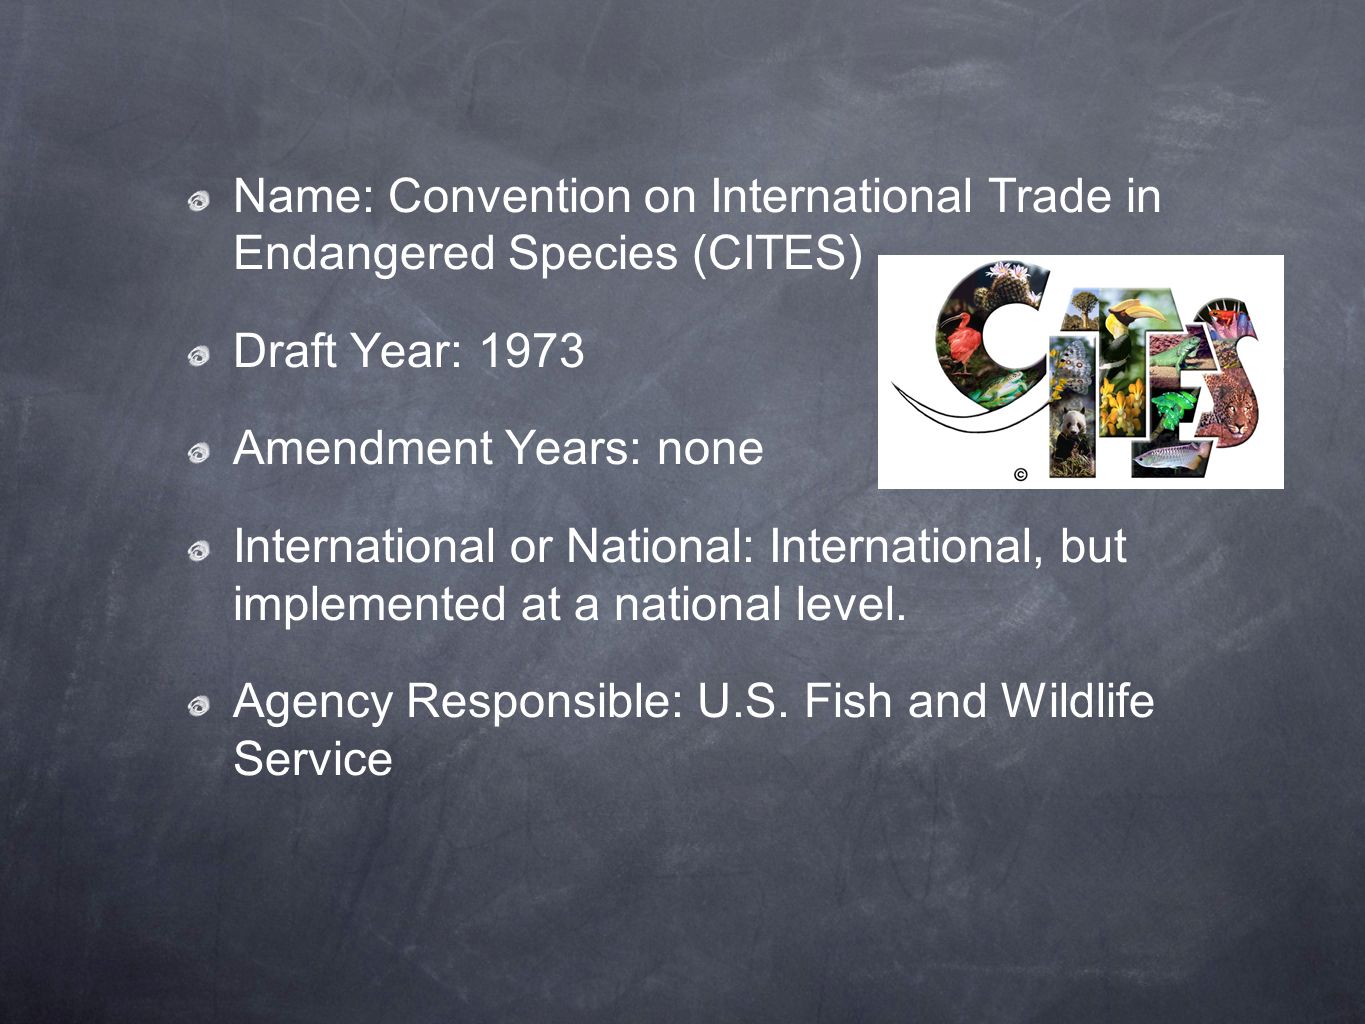 Name: Convention on International Trade in Endangered Species (CITES)